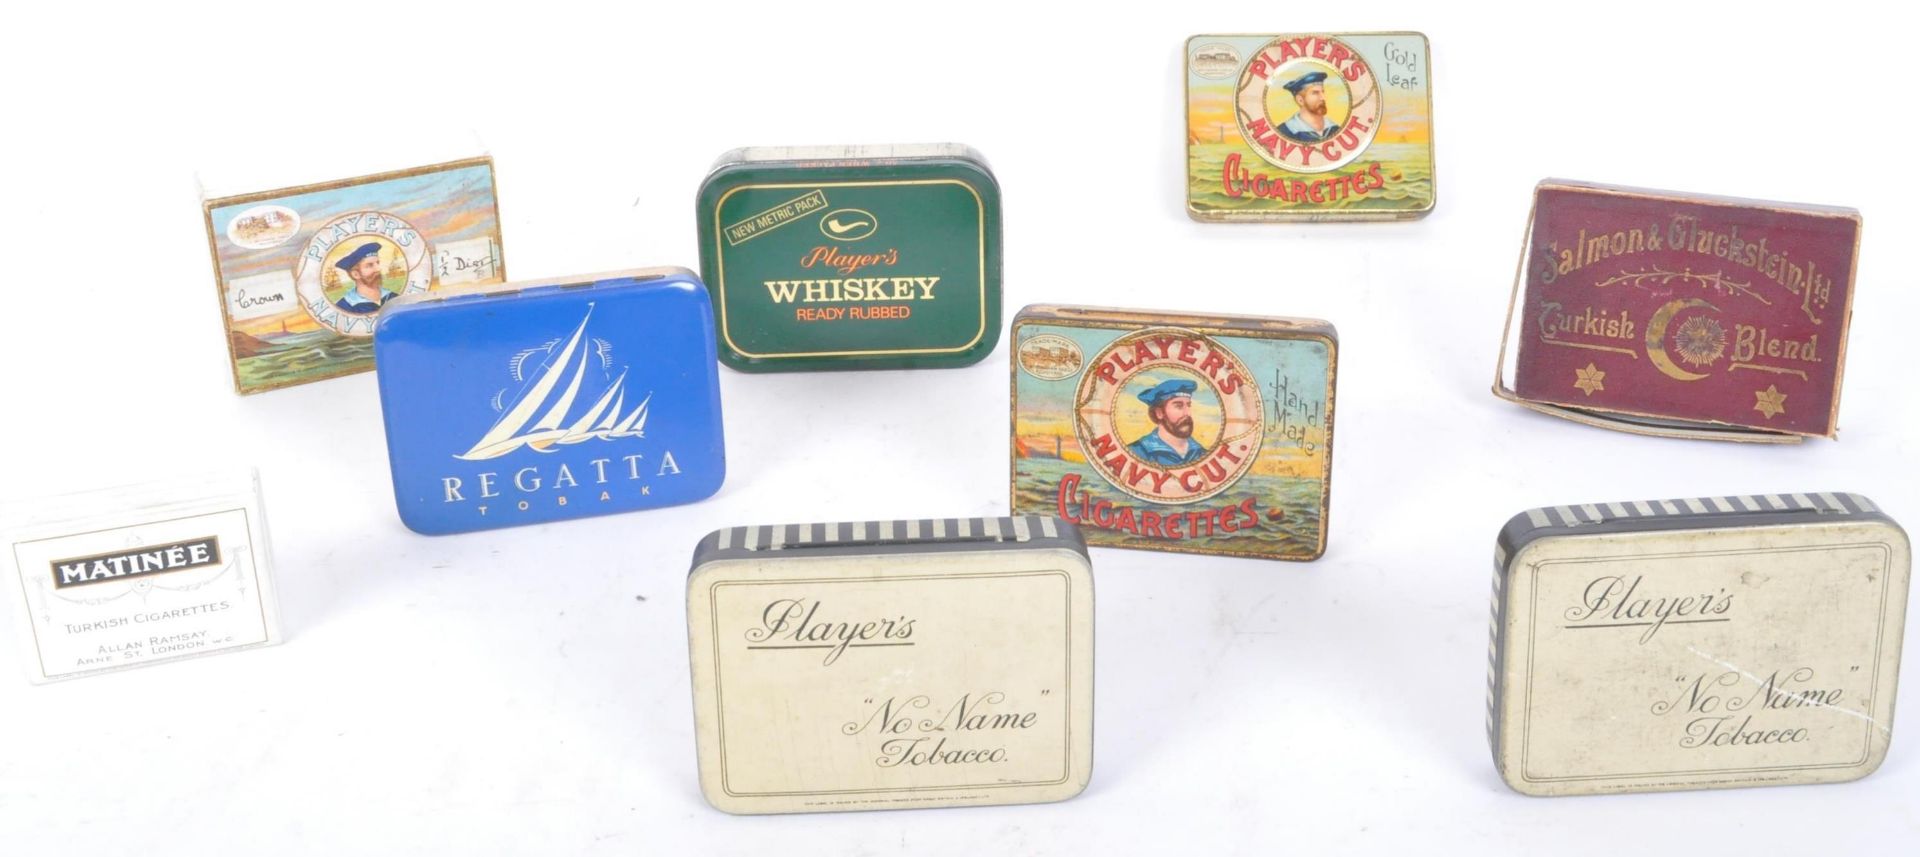 COLLECTION OF CIGARETTE TINS - PLAYERS - REGATTA - MATINEE